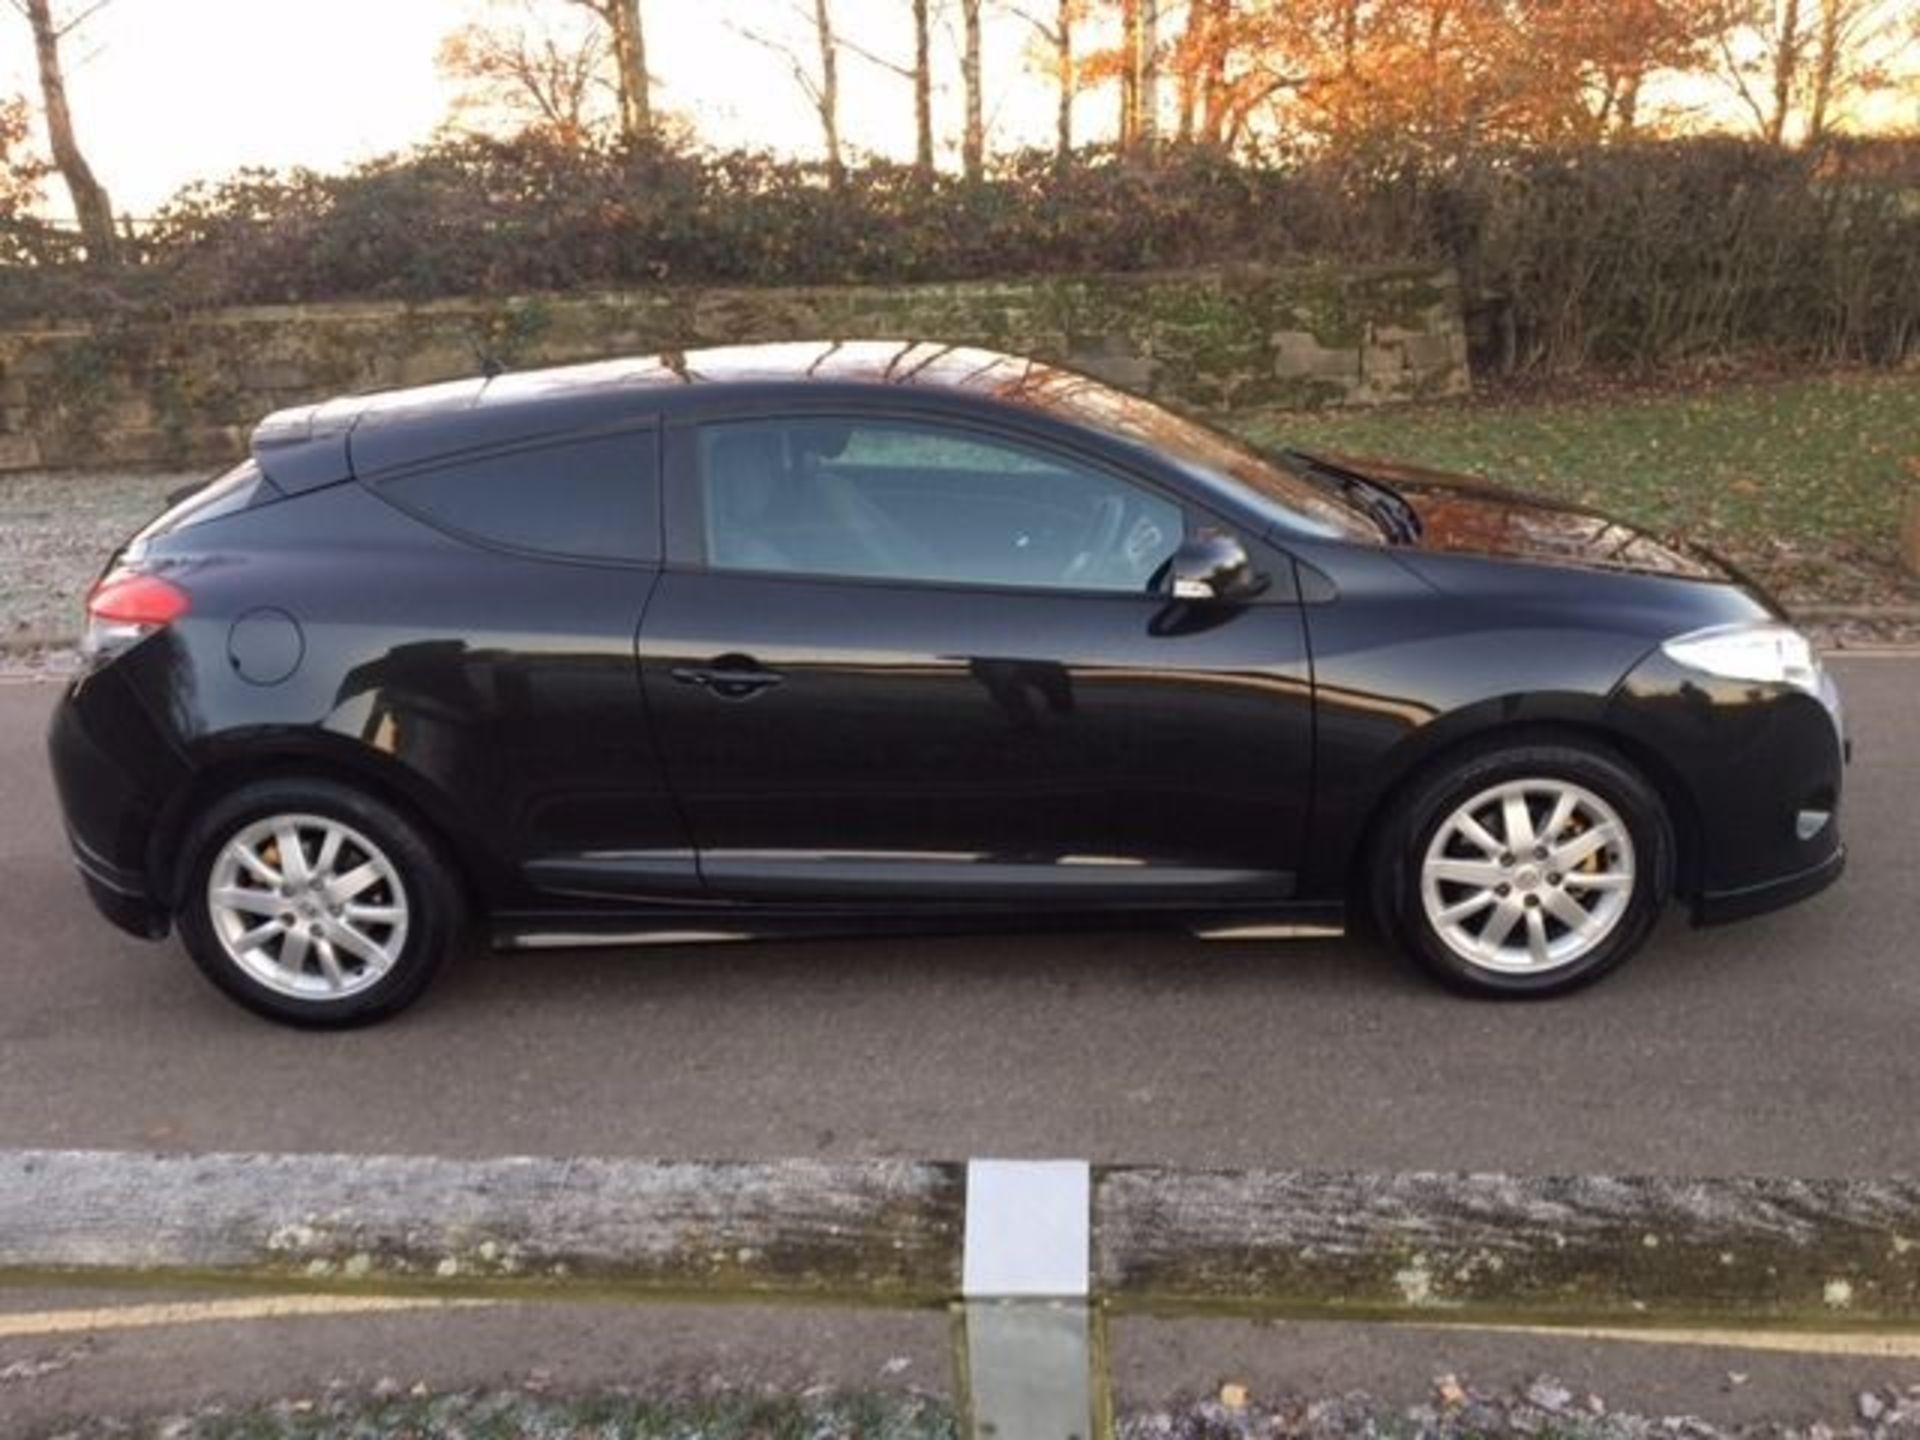 2009 RENAULT MEGANE 1.6 EXPRESSION VVT 110 BHP WITH RS BODY STYLING KIT. 55K MILES 12 MONTHS MOT. - Image 6 of 9